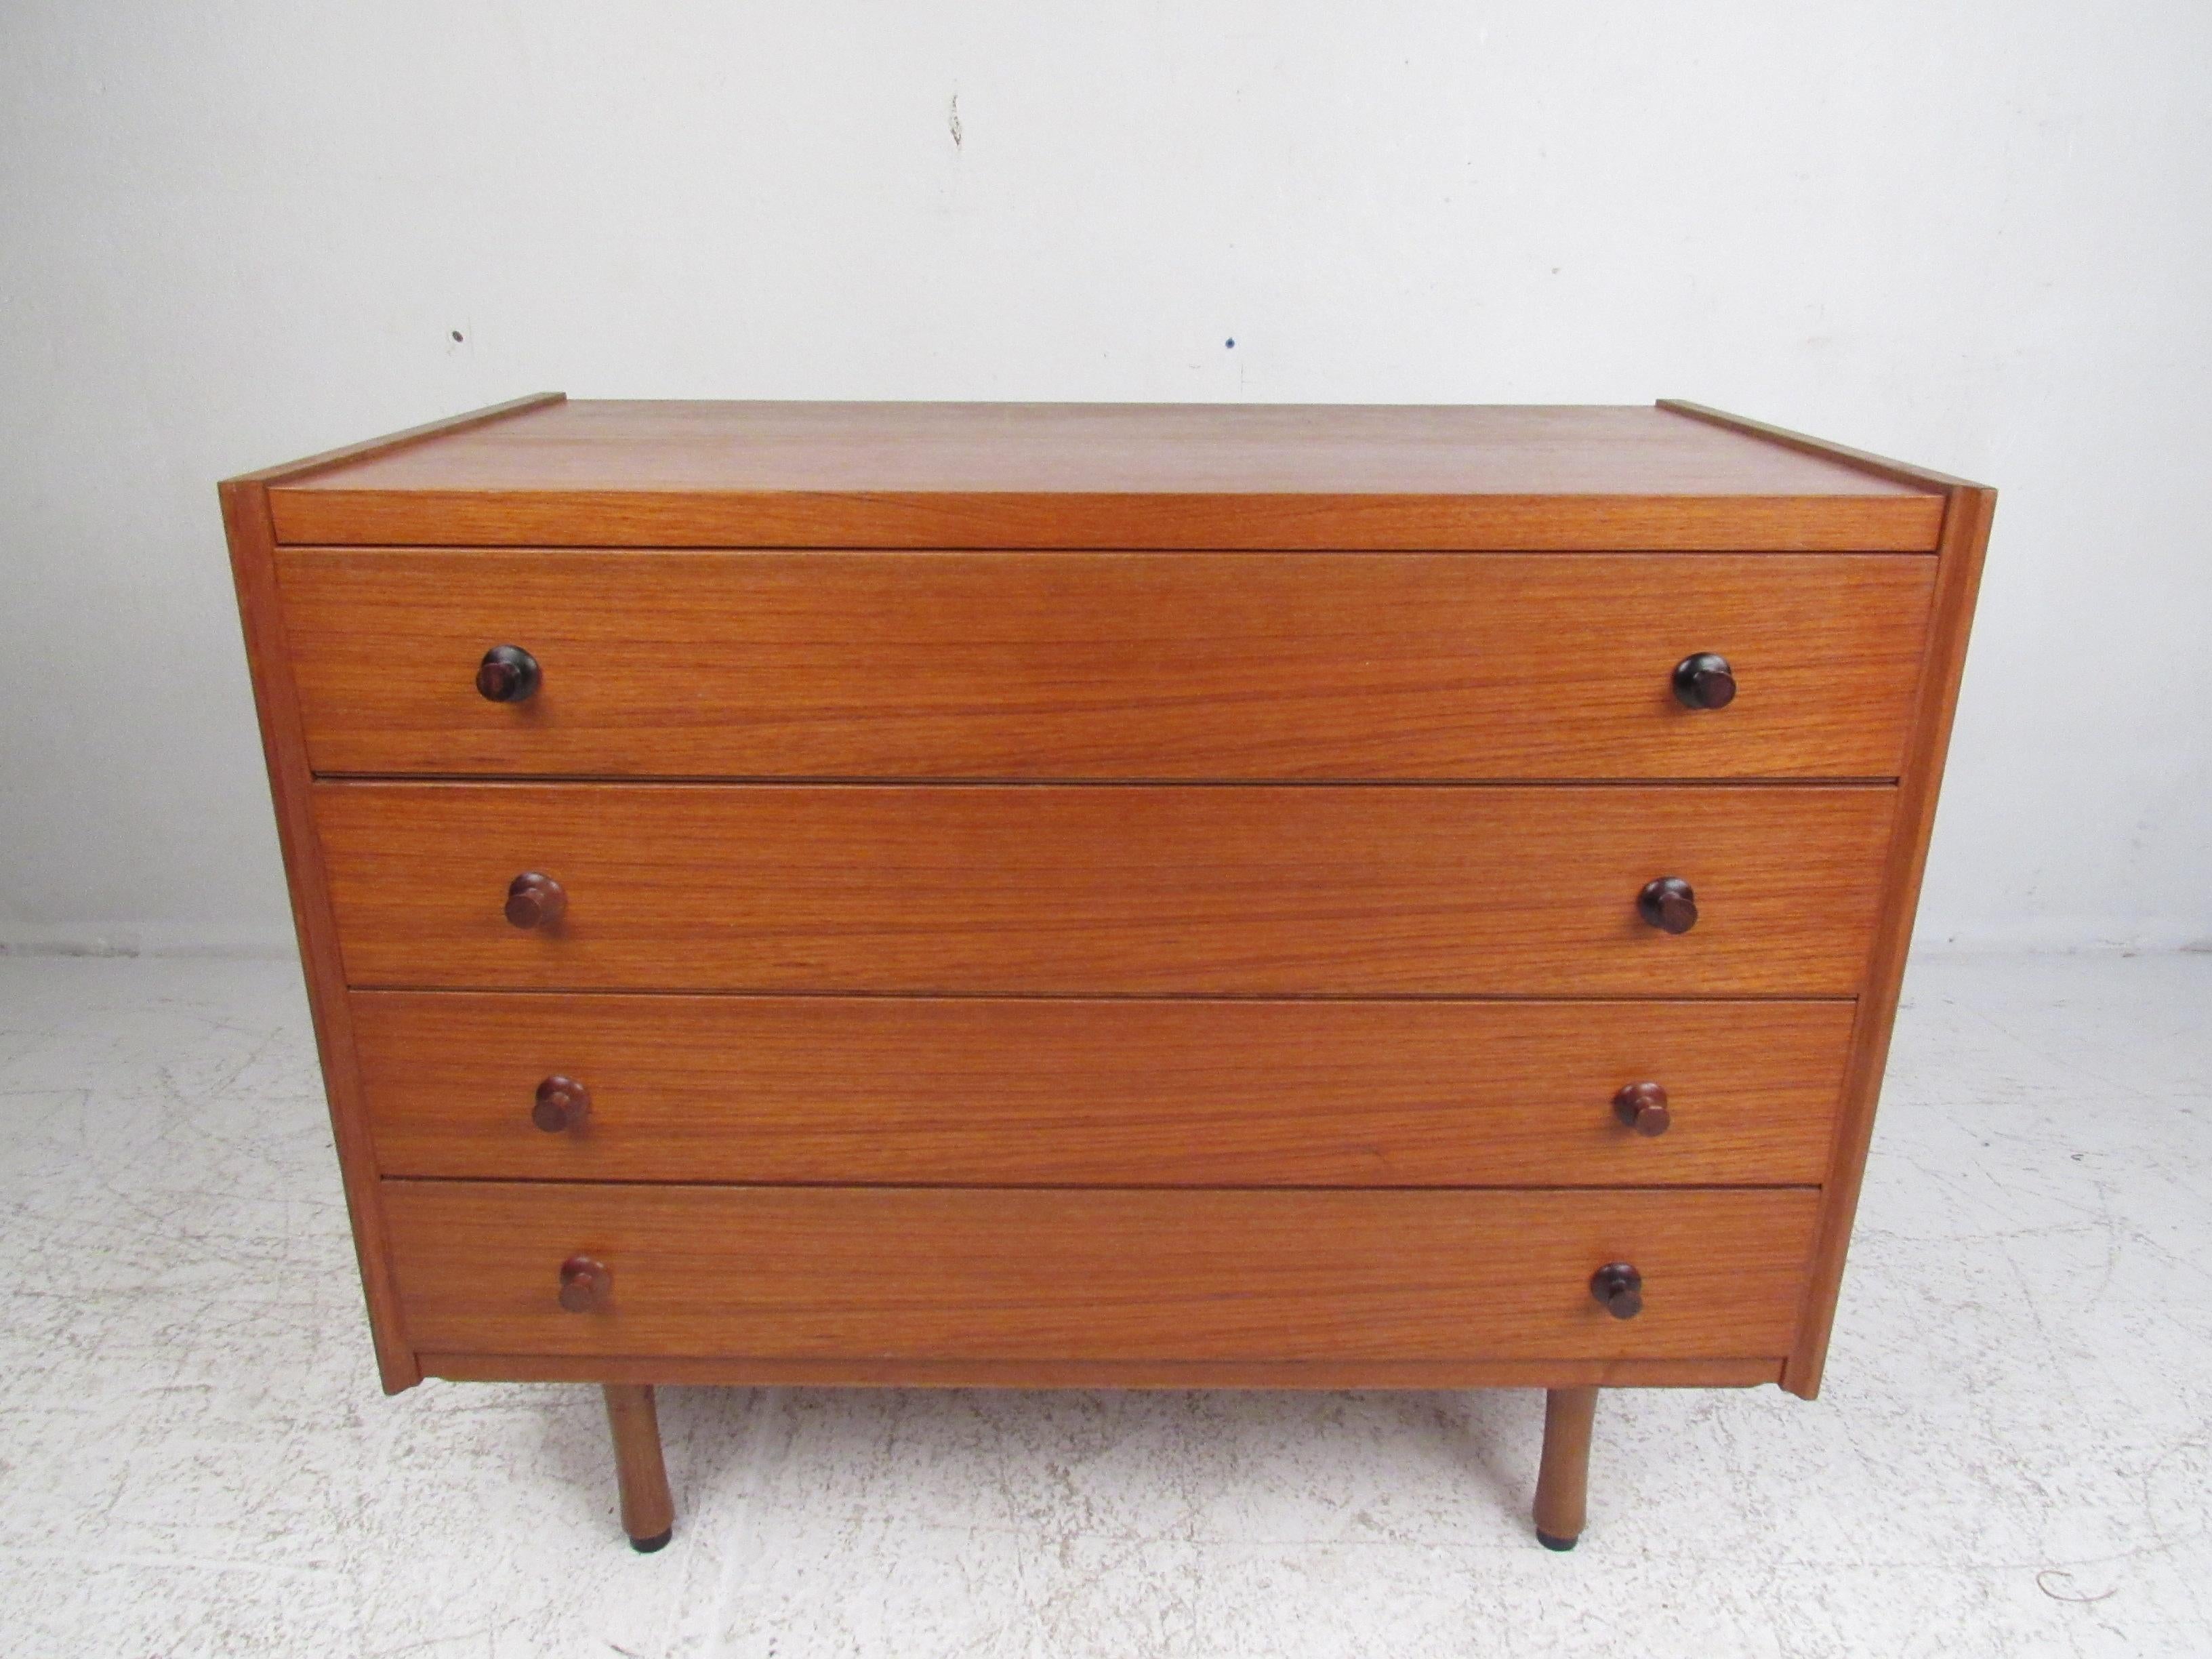 This handsome Danish modern chest boasts conical rosewood pulls, a finished back, and a rich teak wood grain. A compact design with four hefty drawers that ensures plenty of room for storage. The straight line design sits on top of four unusually